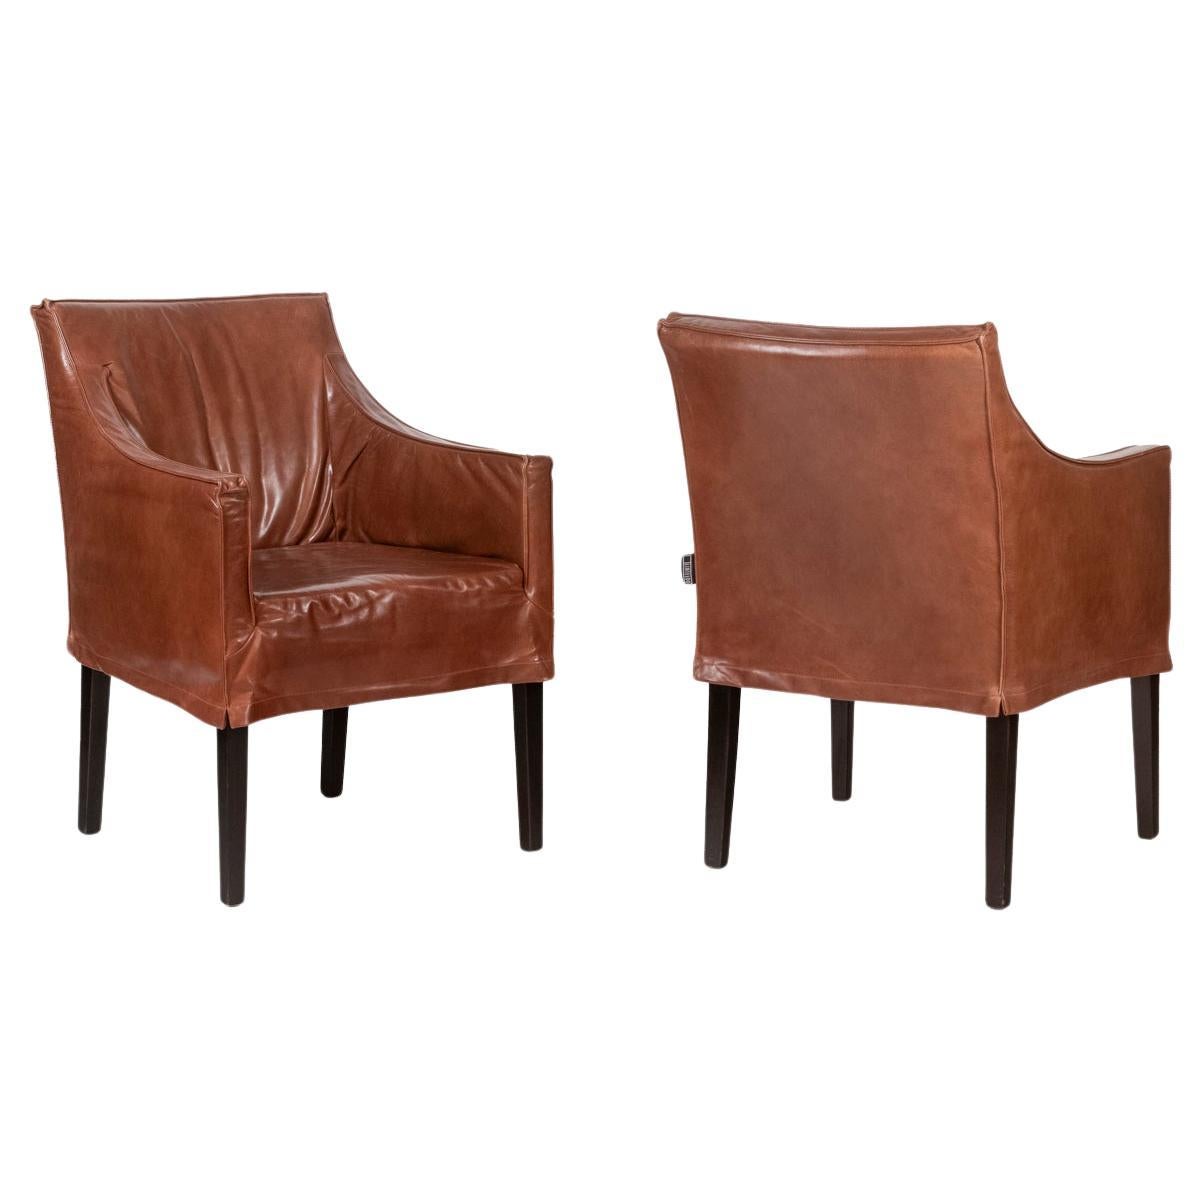 Lintello. Pair of armchairs in camel leather. 1970s. For Sale